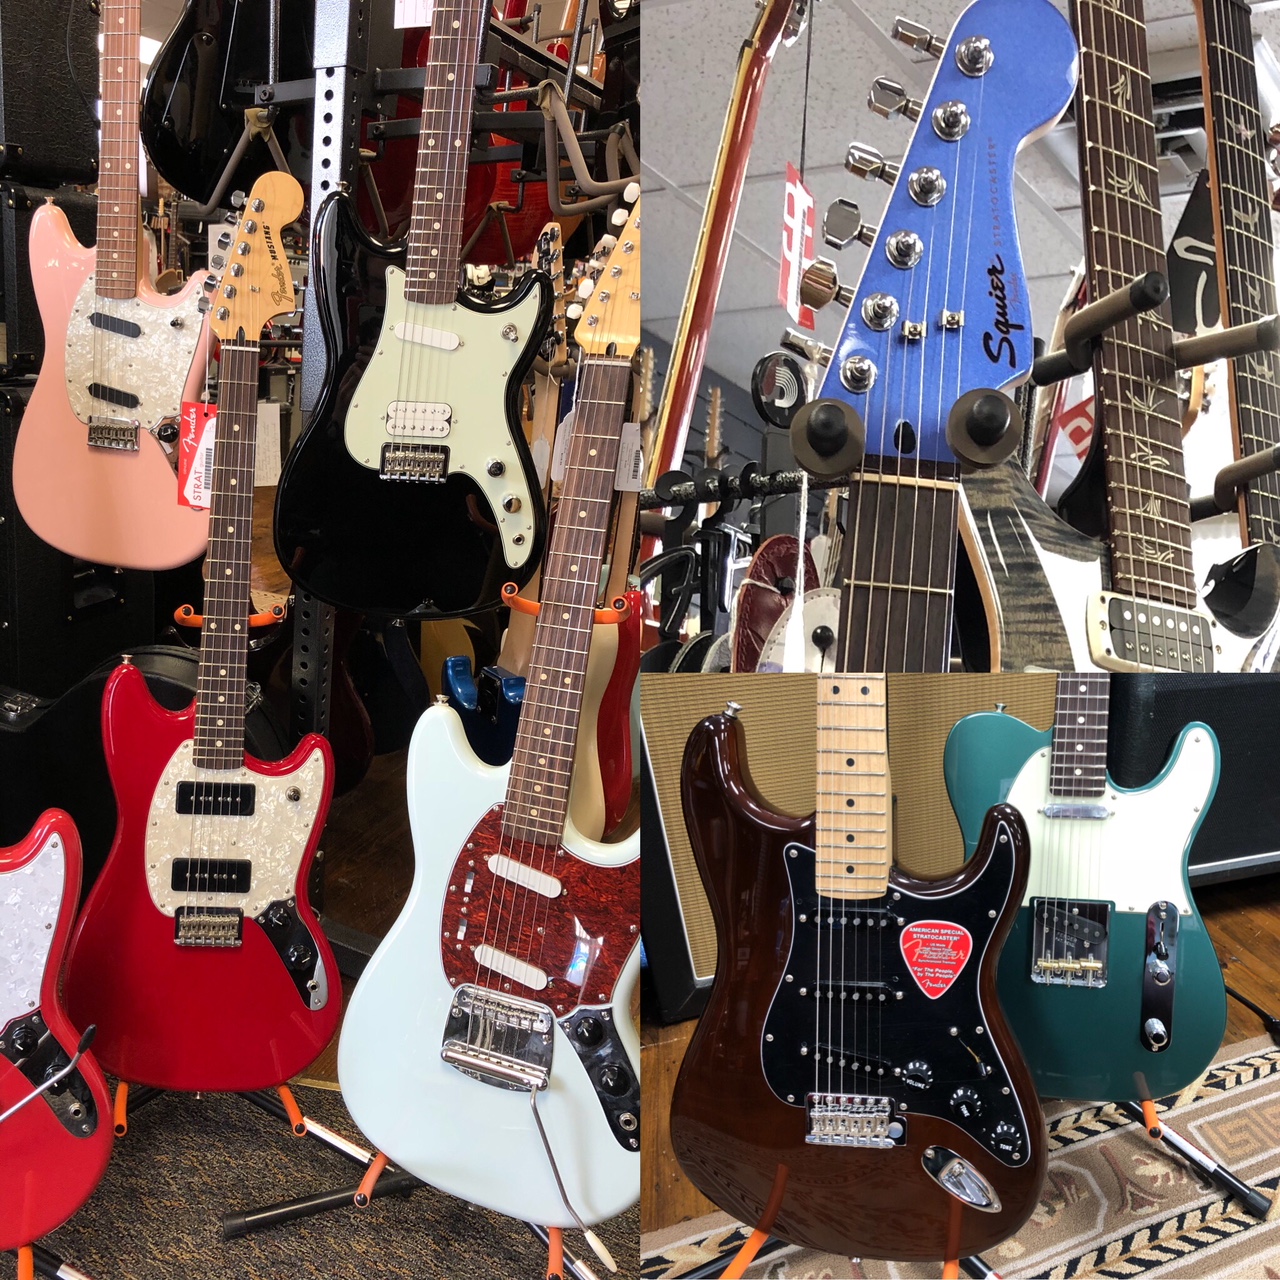 As an "Authorized Fender Dealer" we have the BIGGEST and BEST selection of: Fender Acoustic guitar and acoustic amplification, as well as Electric Guitar, Amps, and Bass Guitars(both electric and acoustic). Our Fender selection is always evolving with both new and used equipment. Will West Music and Sound's in-house Inventory is second to none!! 